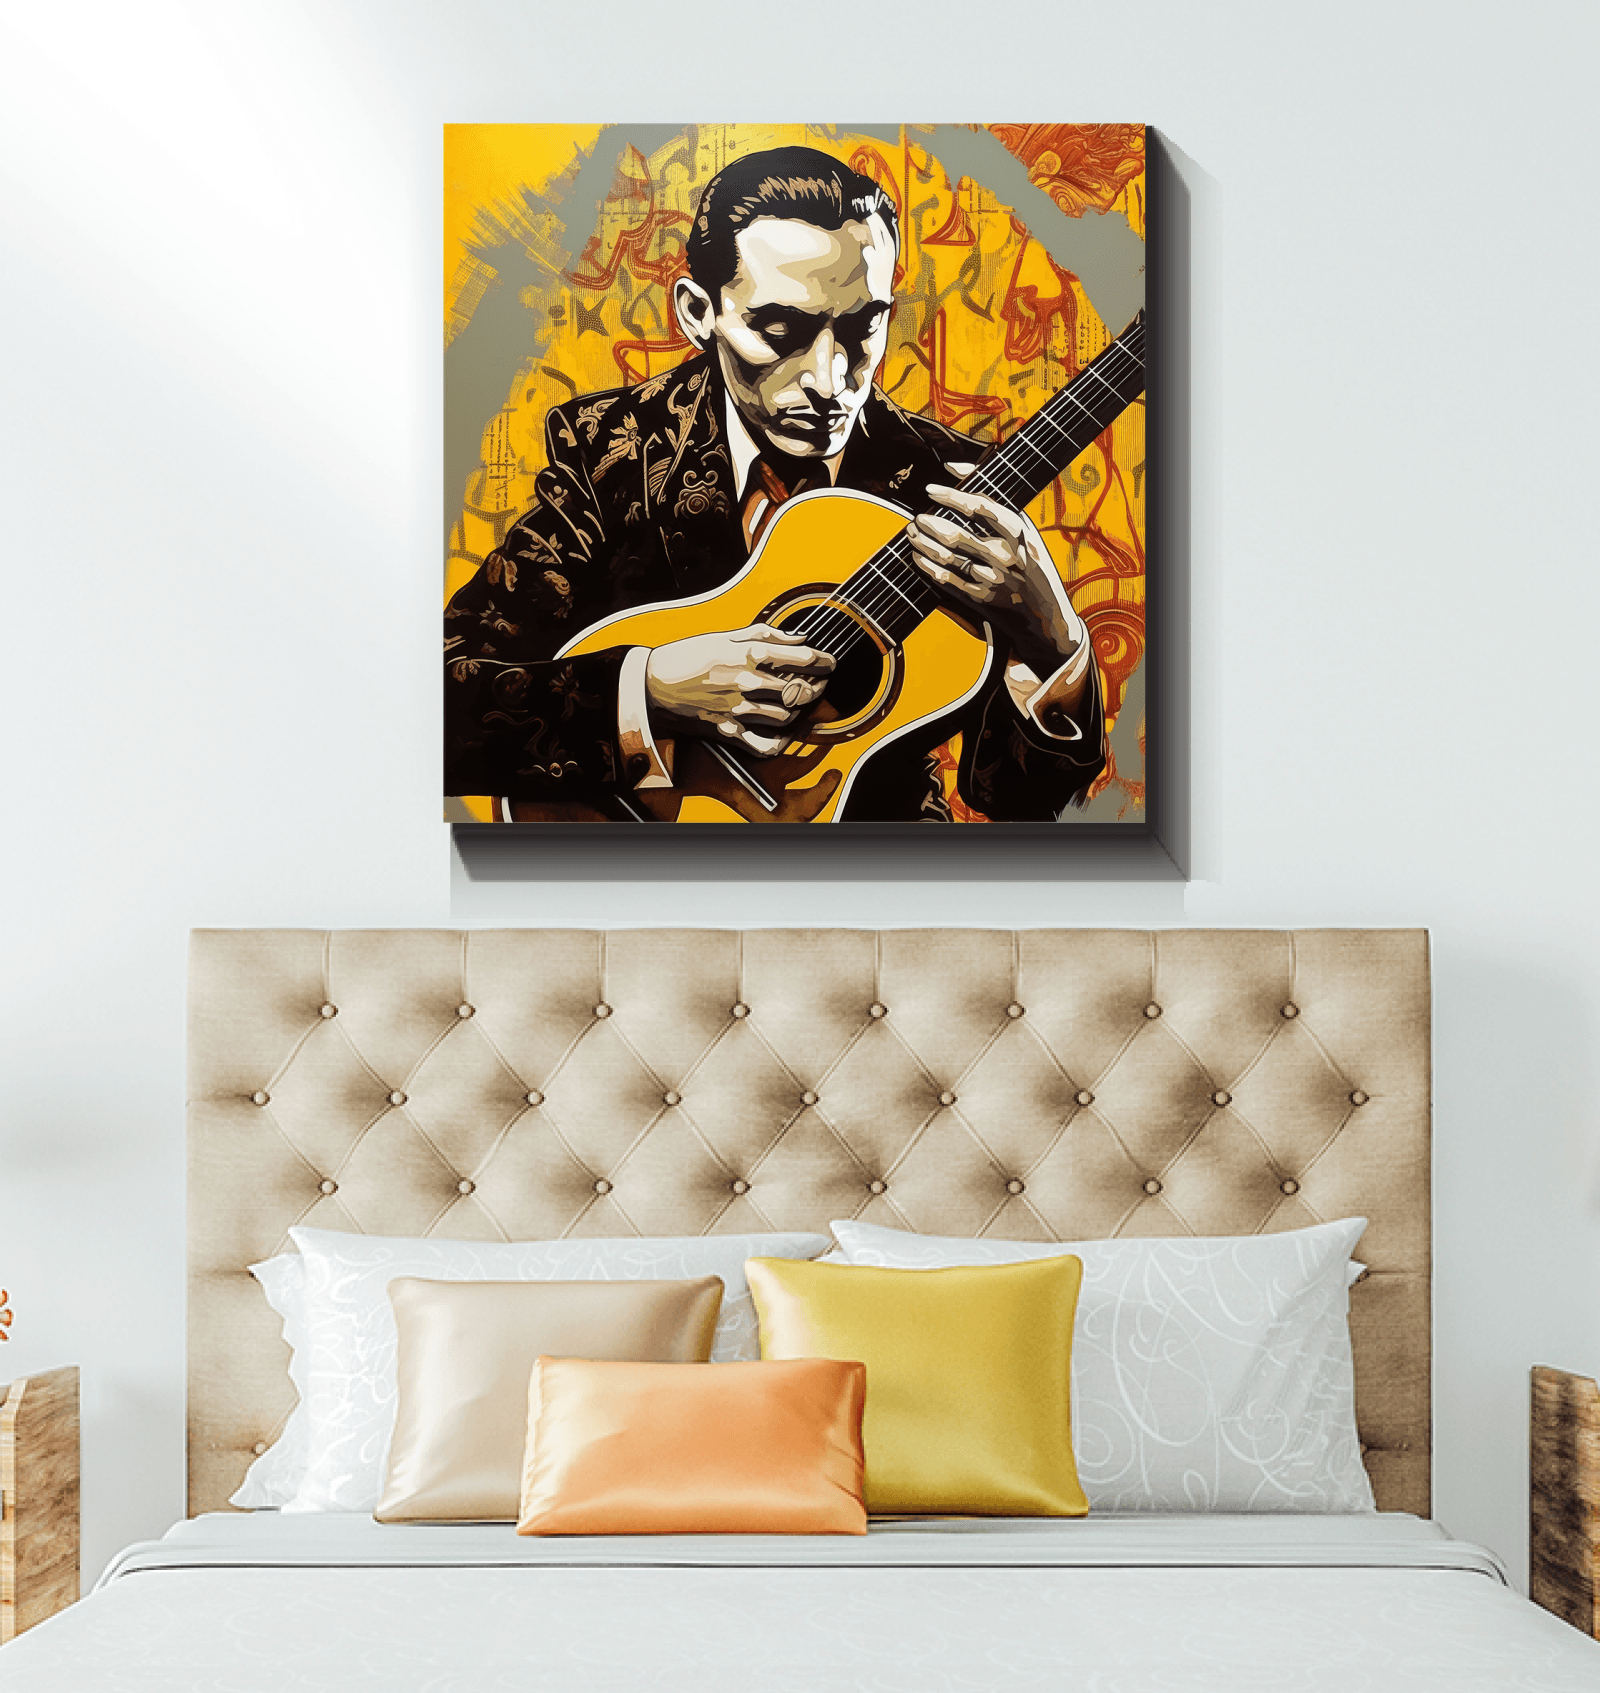 Expressive wrapped canvas art to inspire your daily living.